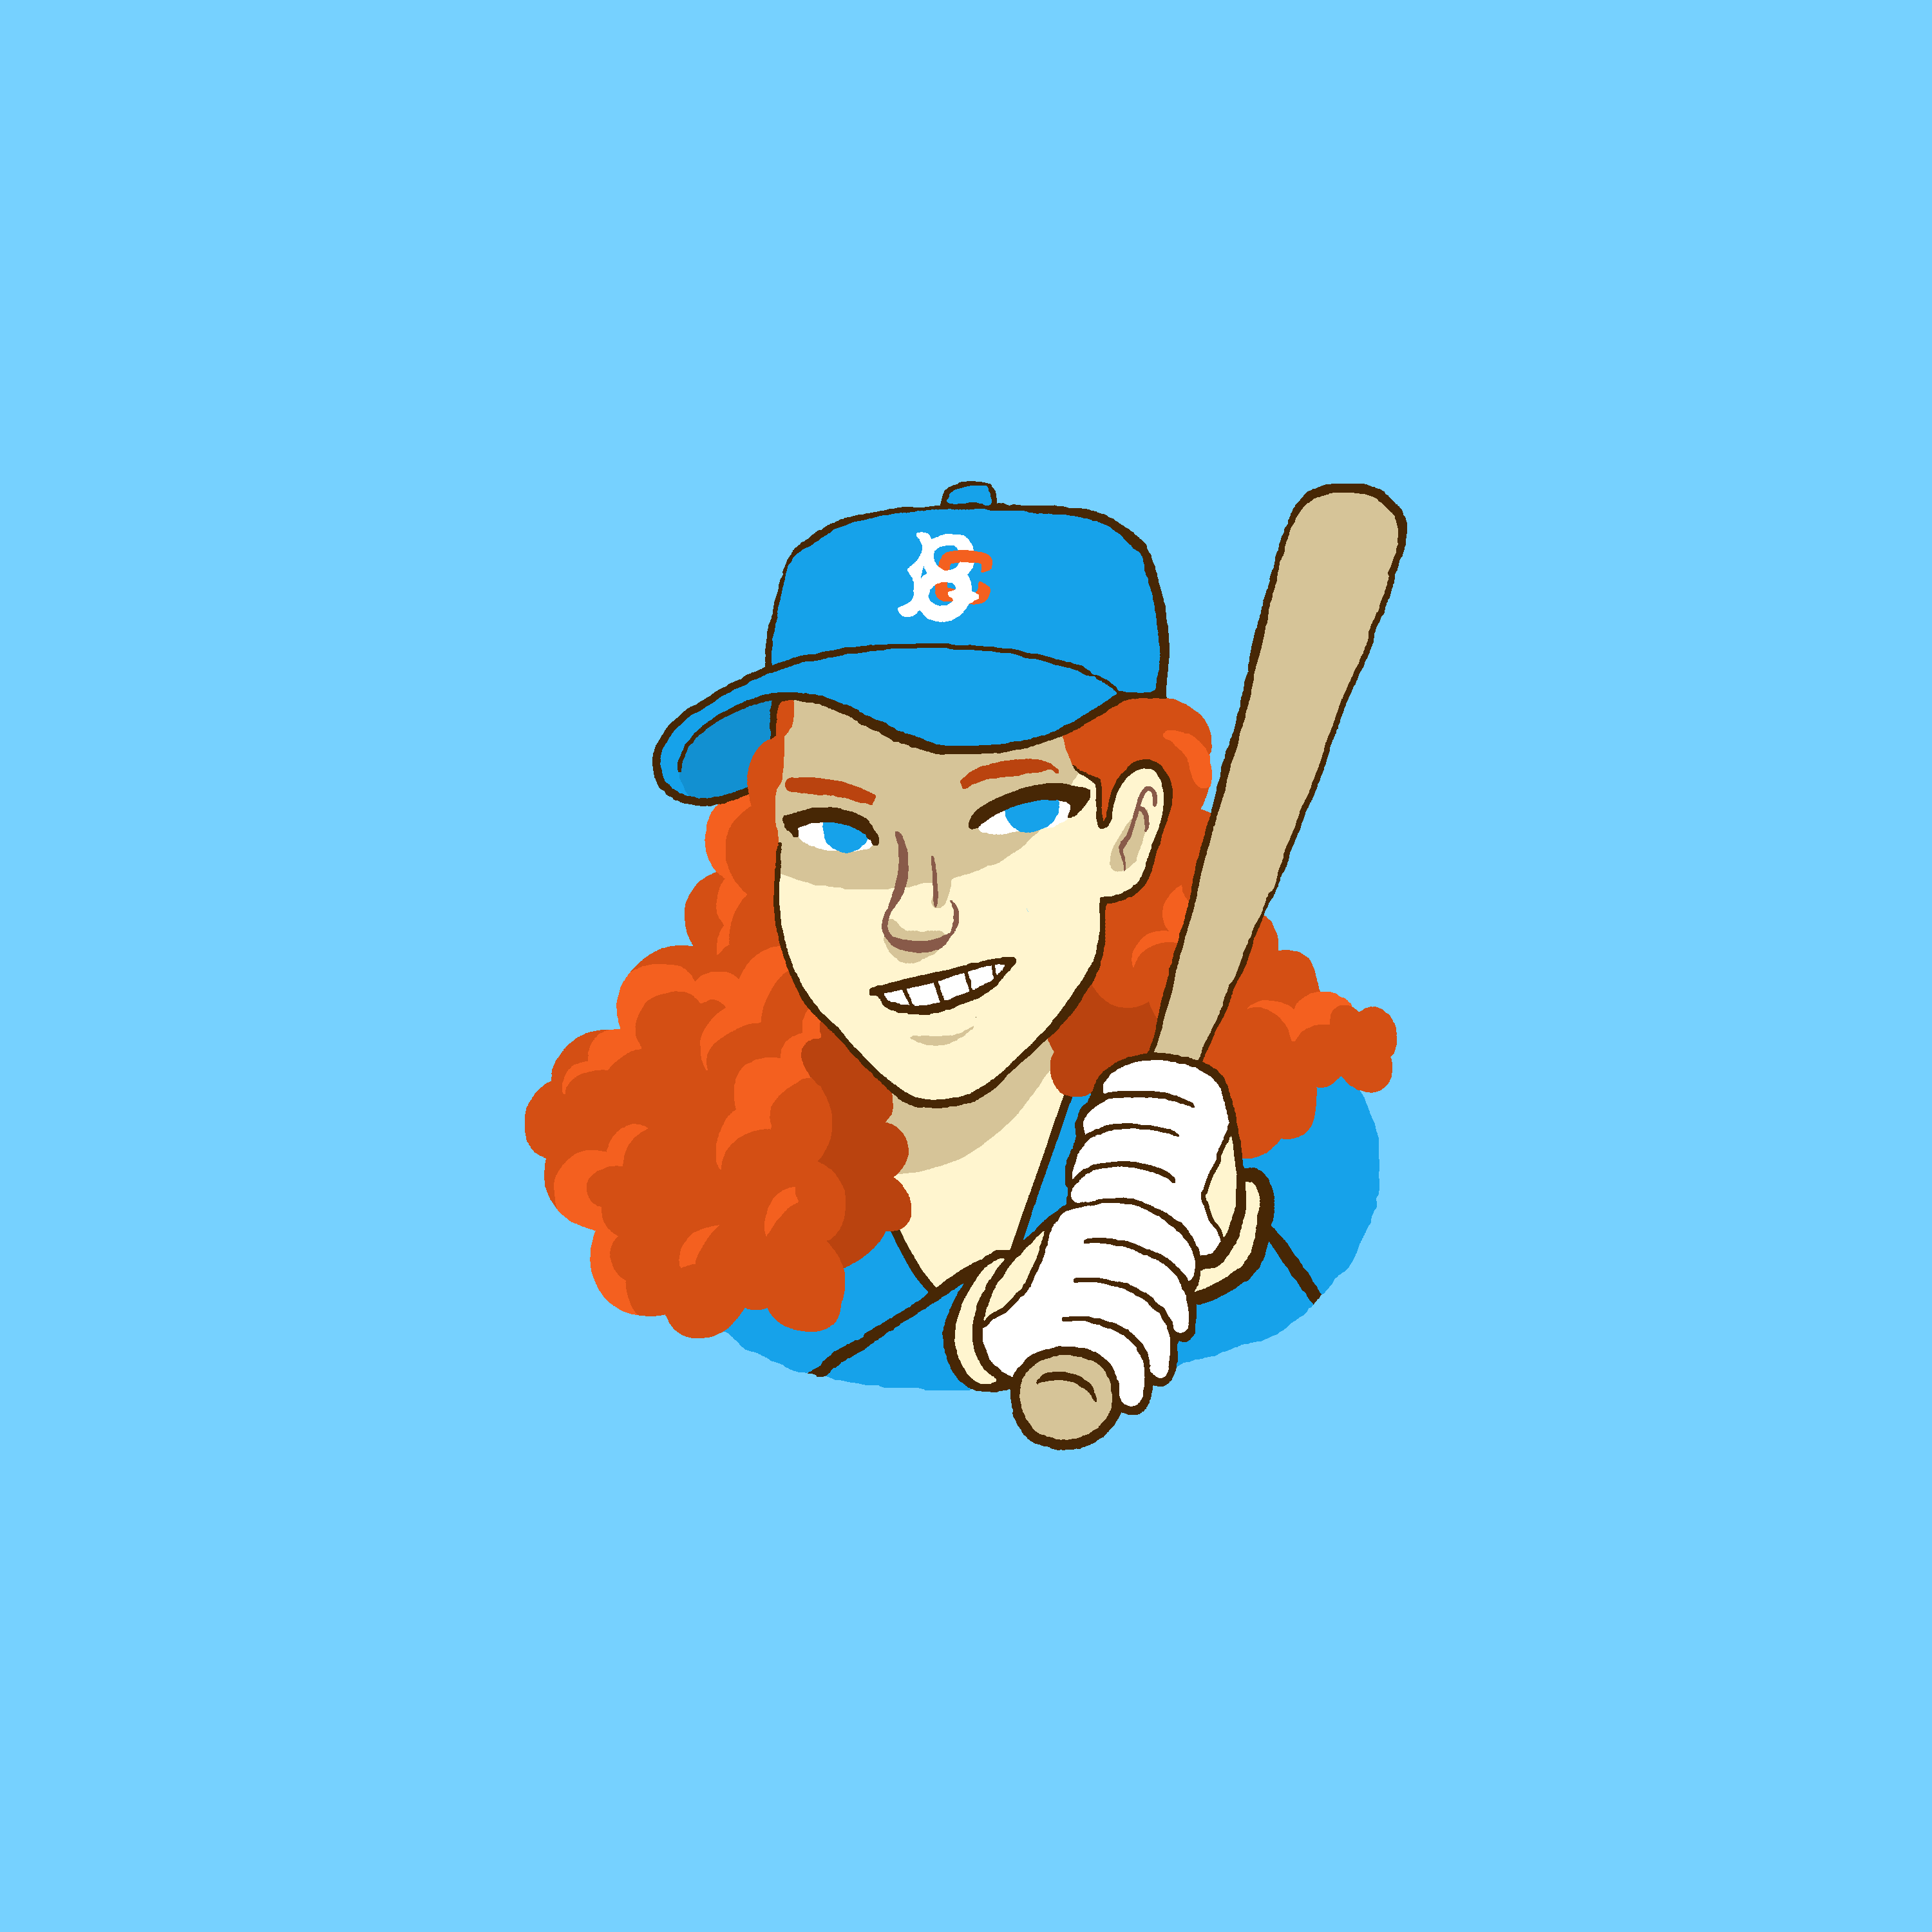 This is a cartoon version of a woman holding a baseball bat with a ball cap on.